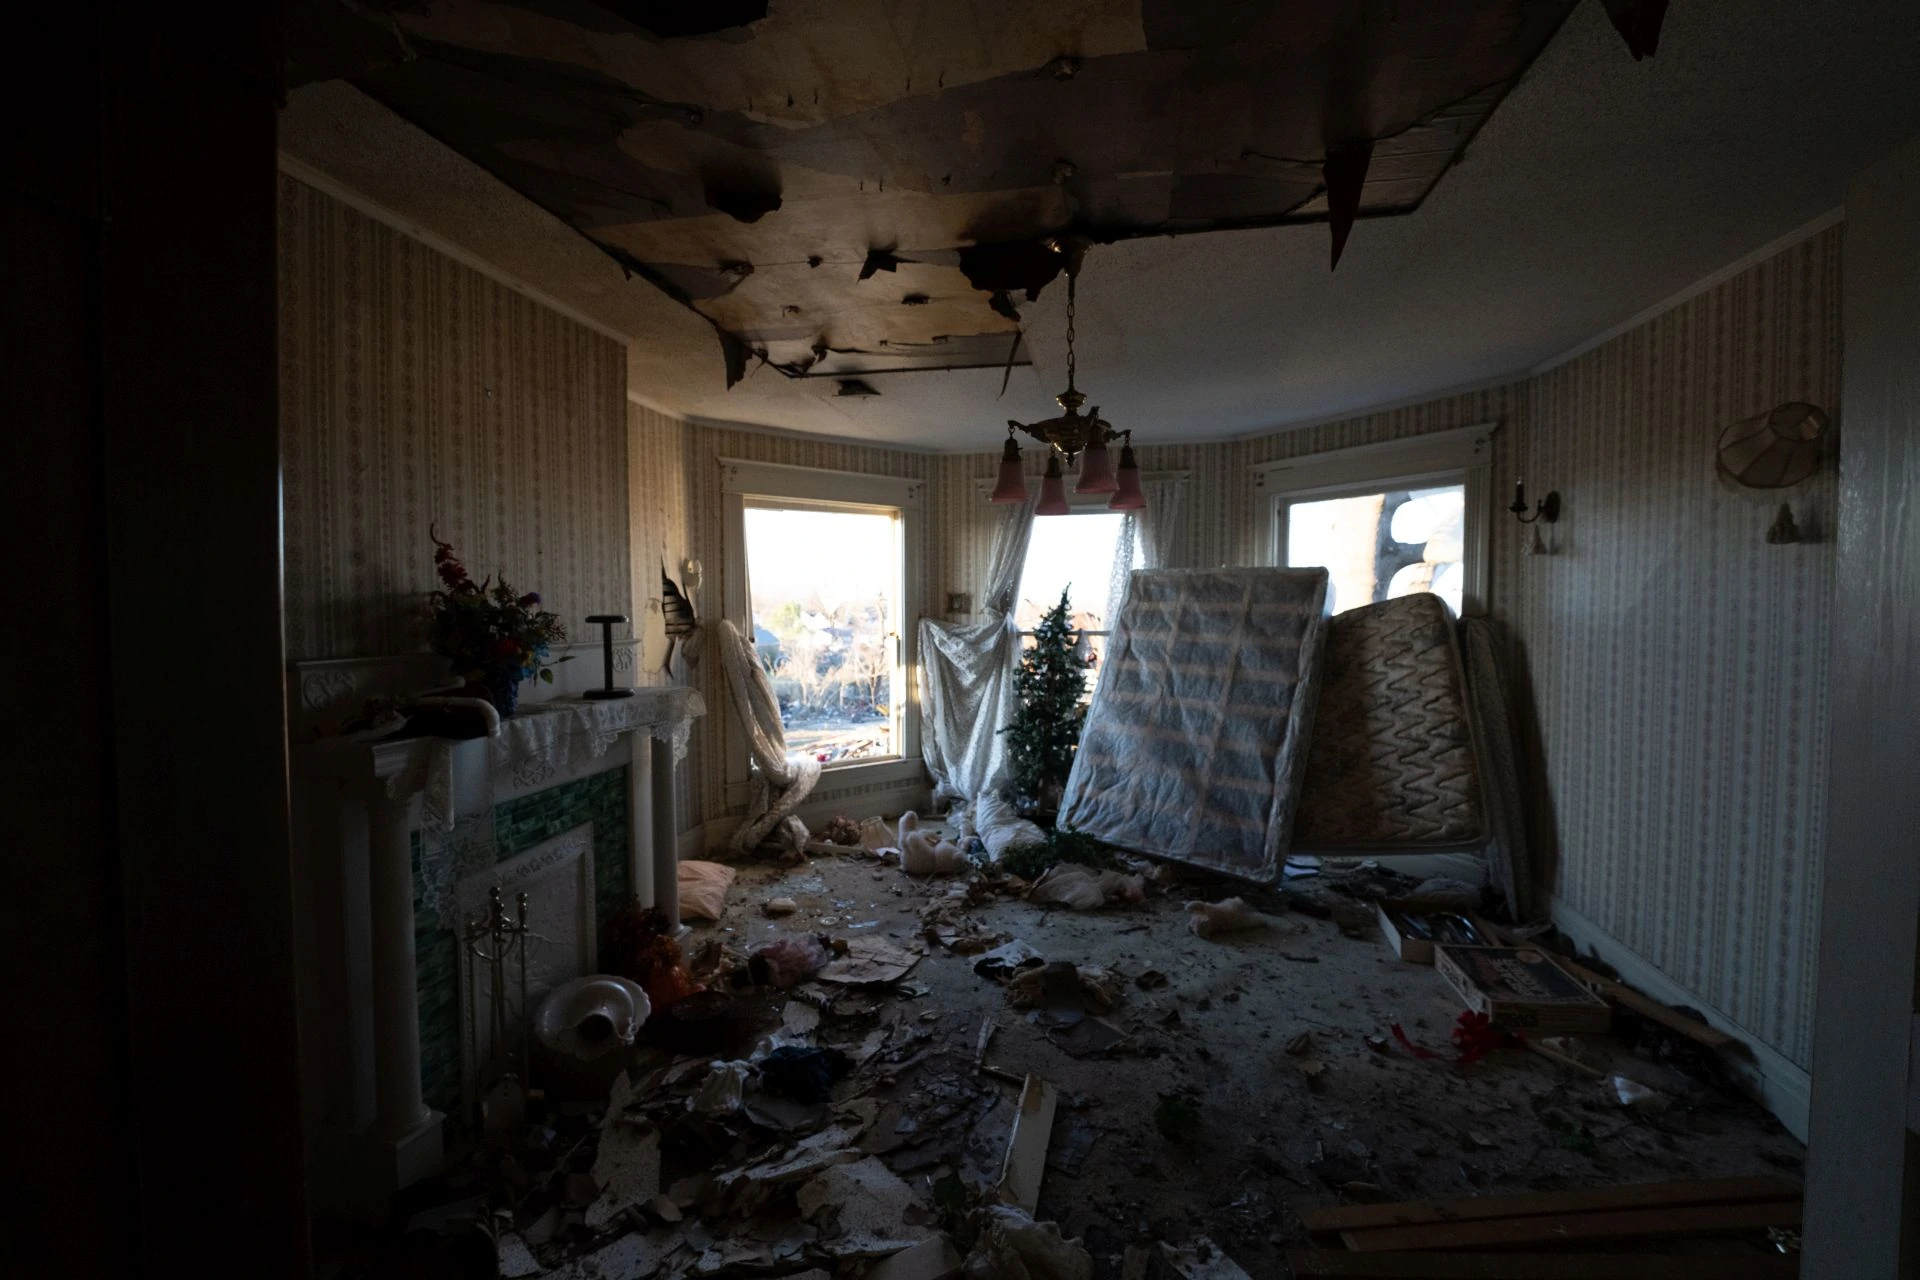 The Crouch family home after a direct tornado hit